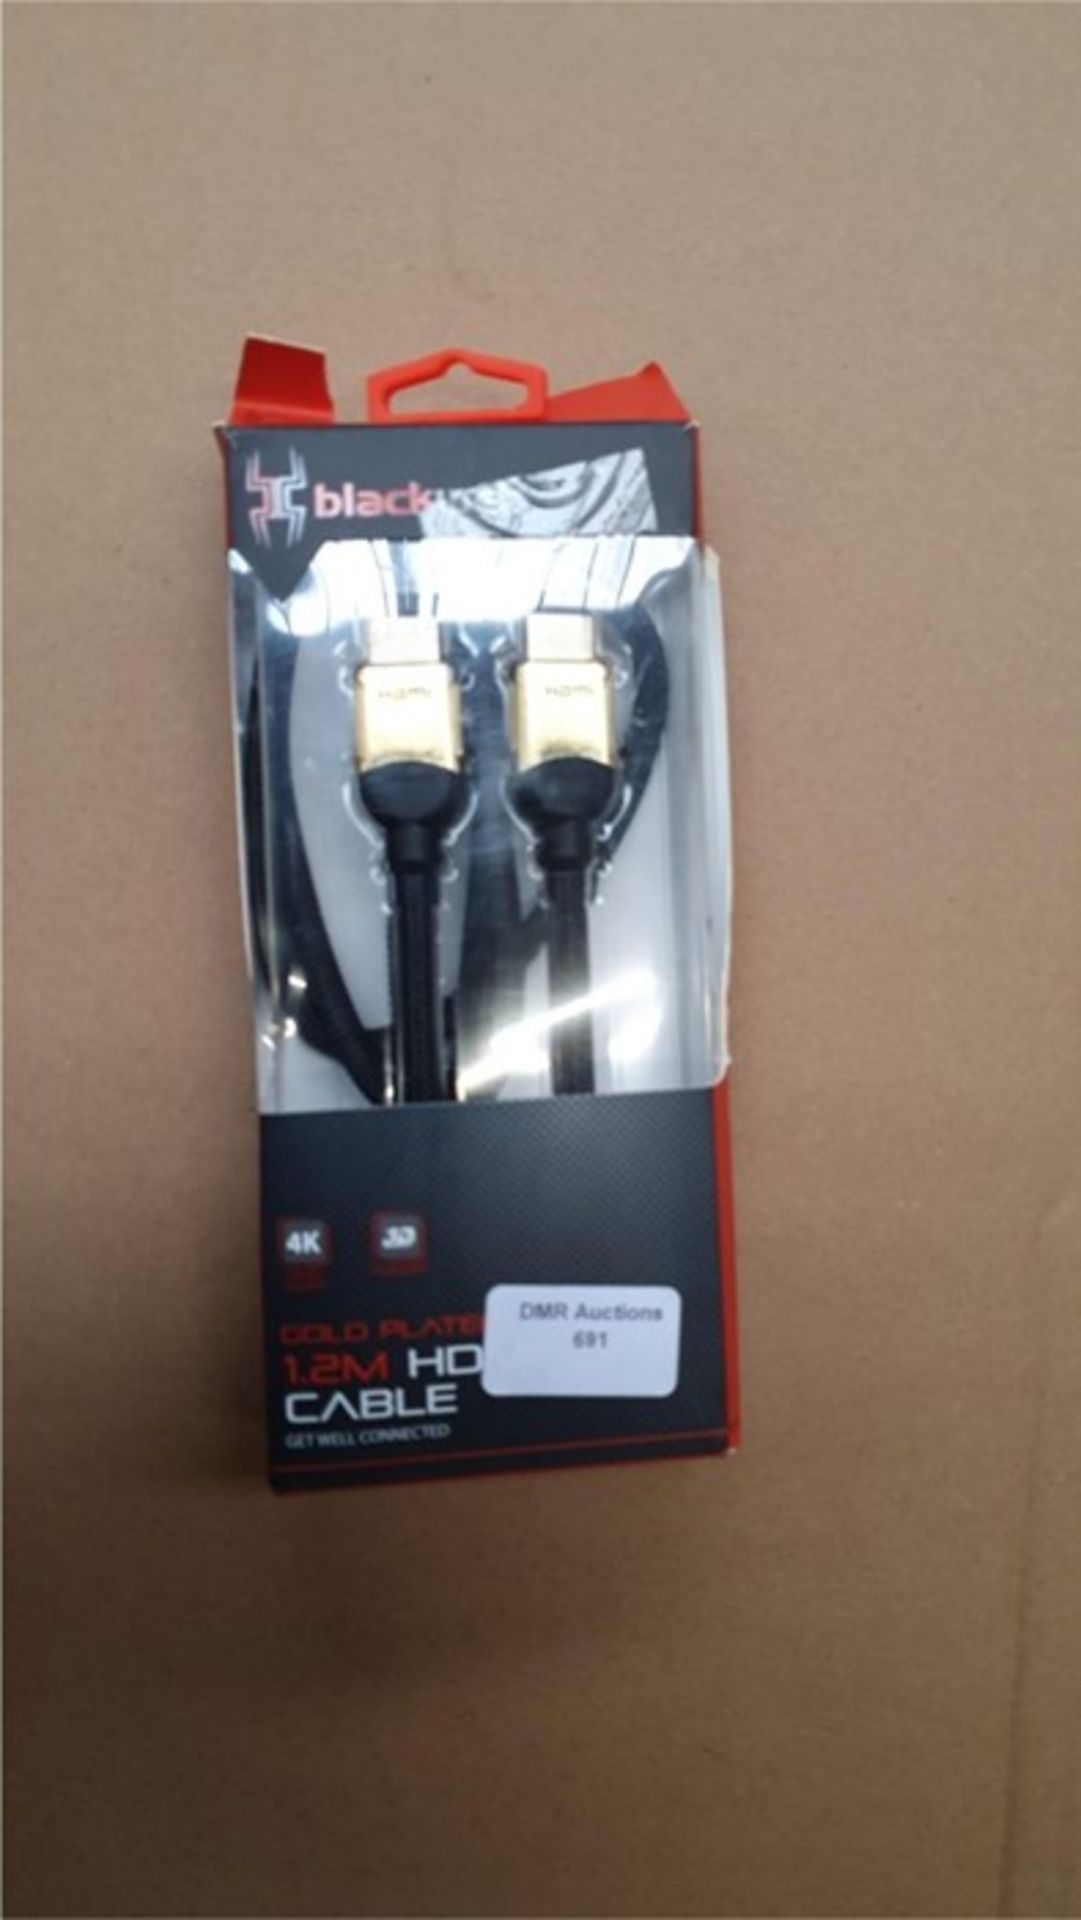 1 BOXED BLACK WEB 1.2M GOLD PLATED HDMI CABLE, FOR 4K AND 3D / BL-5599 / RRP £18.00 (VIEWING